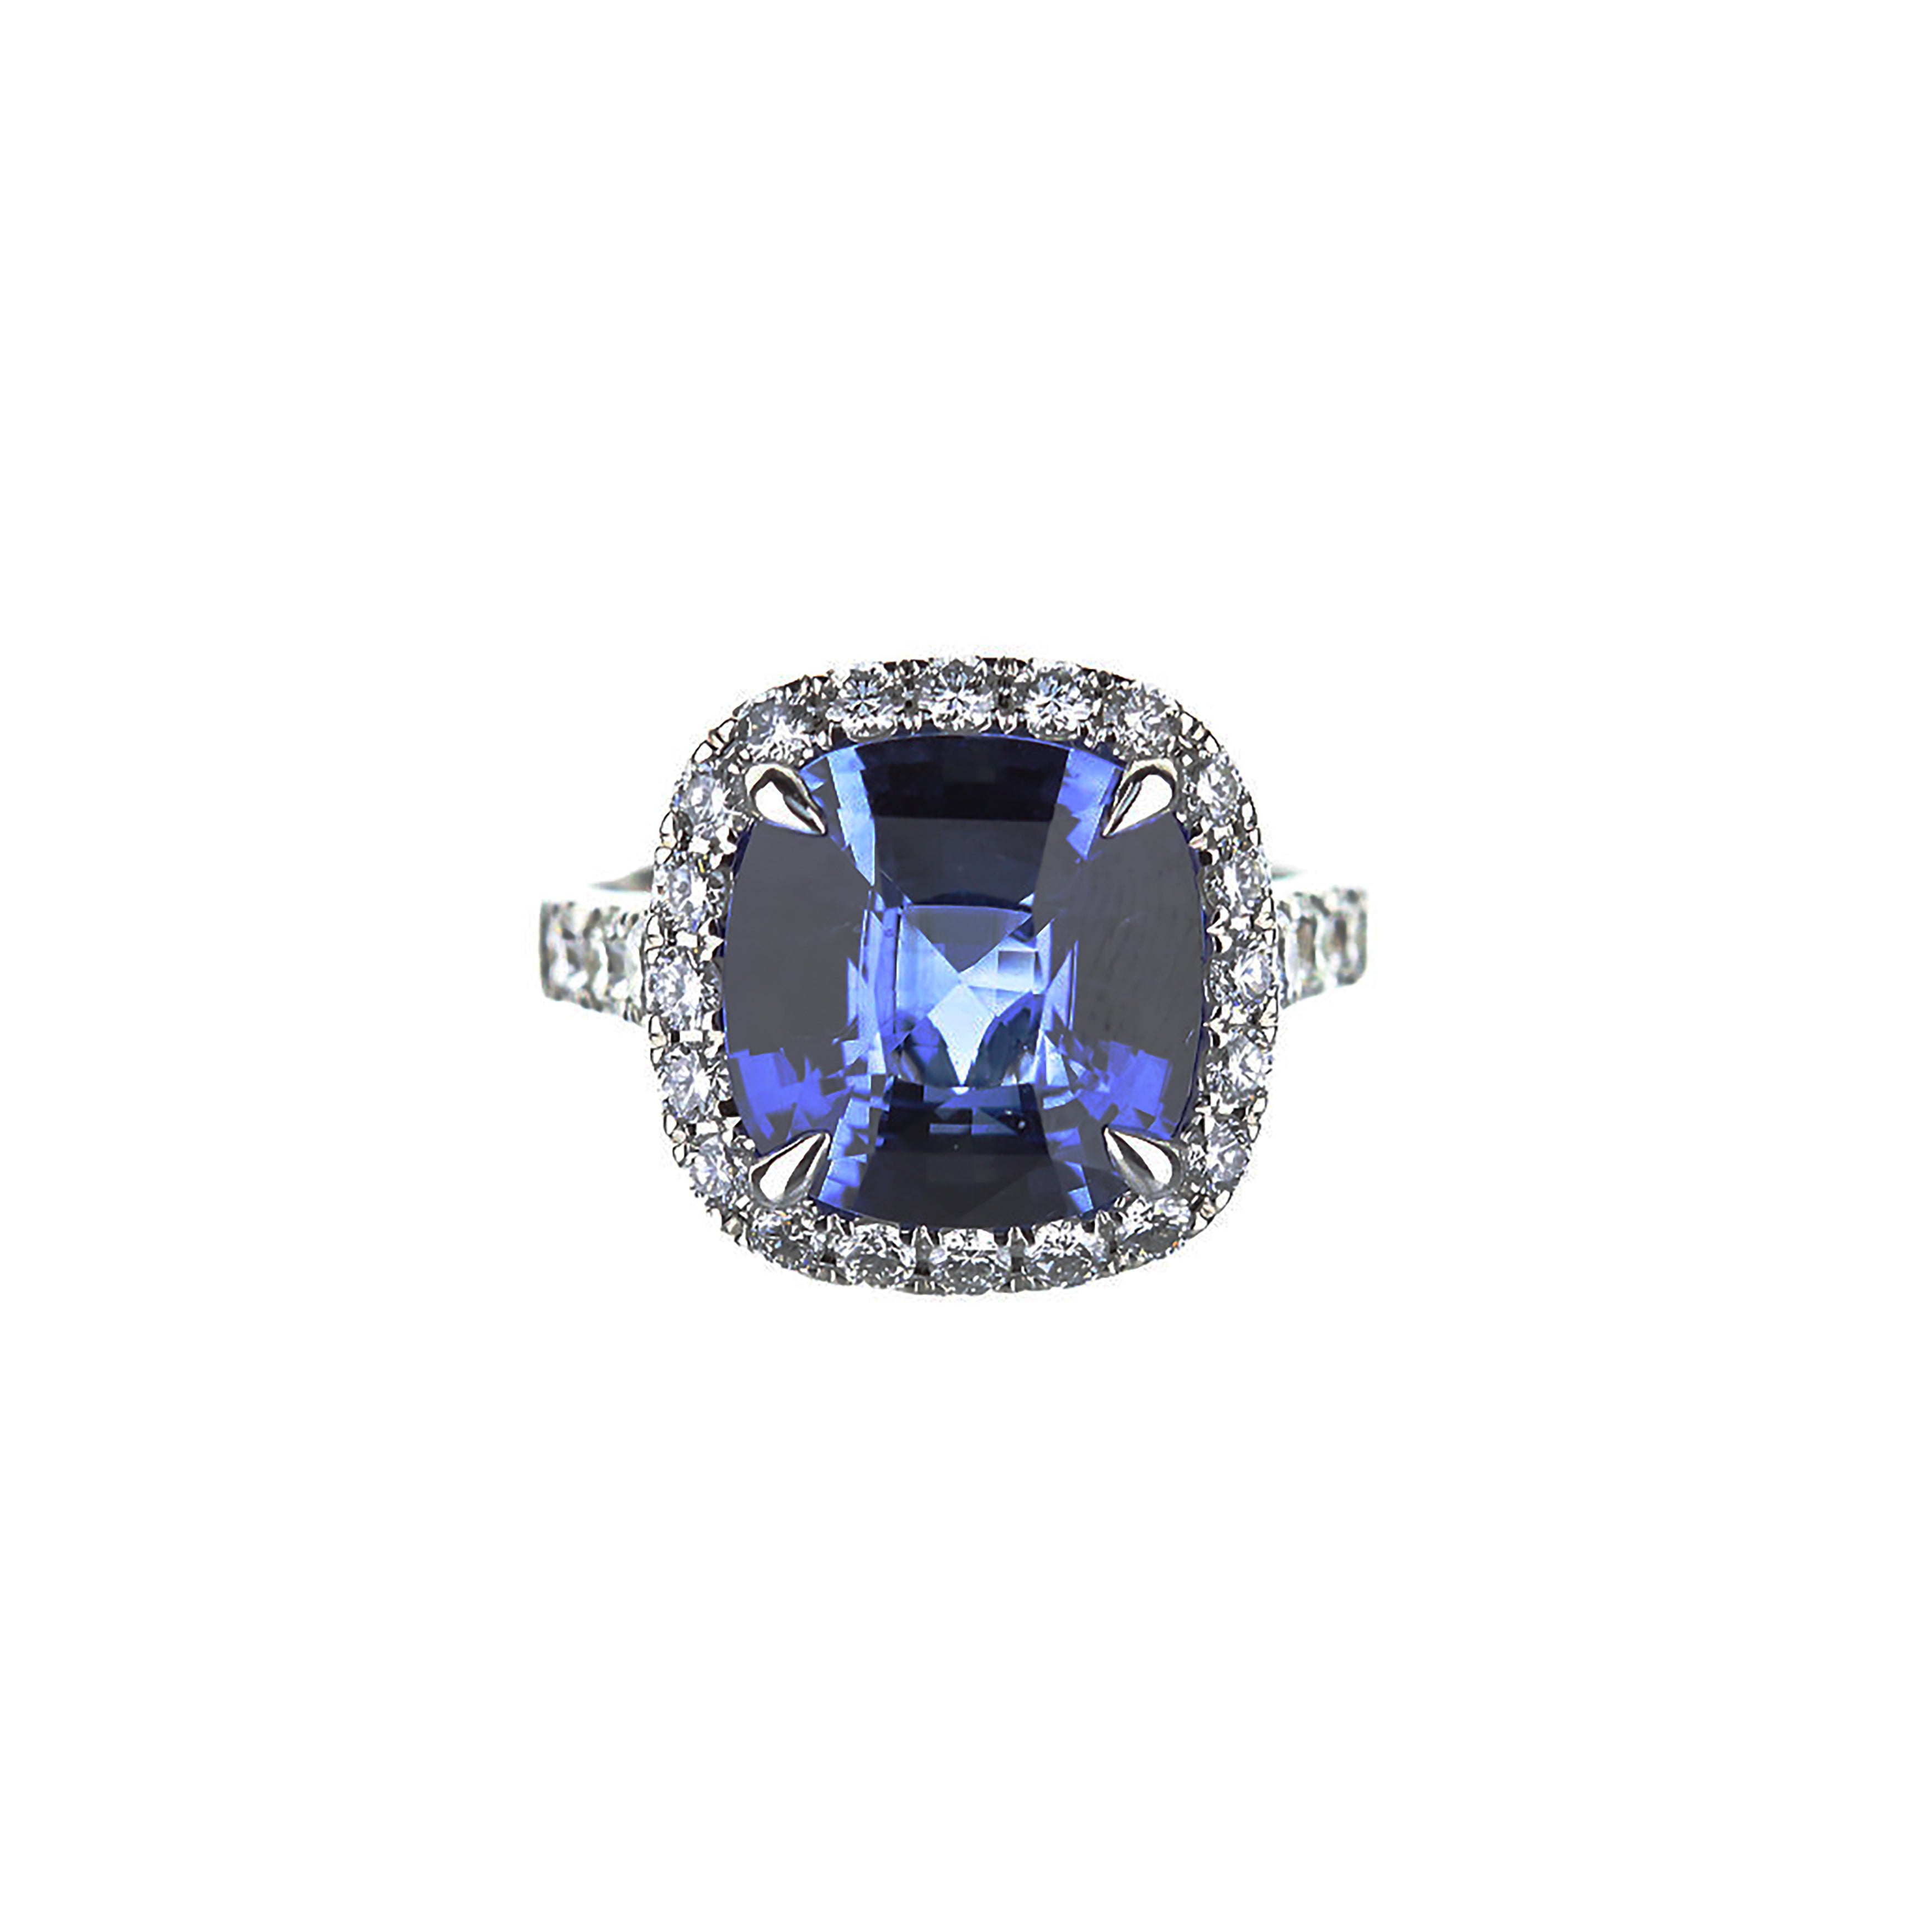 14K White Gold Oval Blue Sapphire and Diamond Halo Ring 1.38 Carats -  Moriartys Gem Art